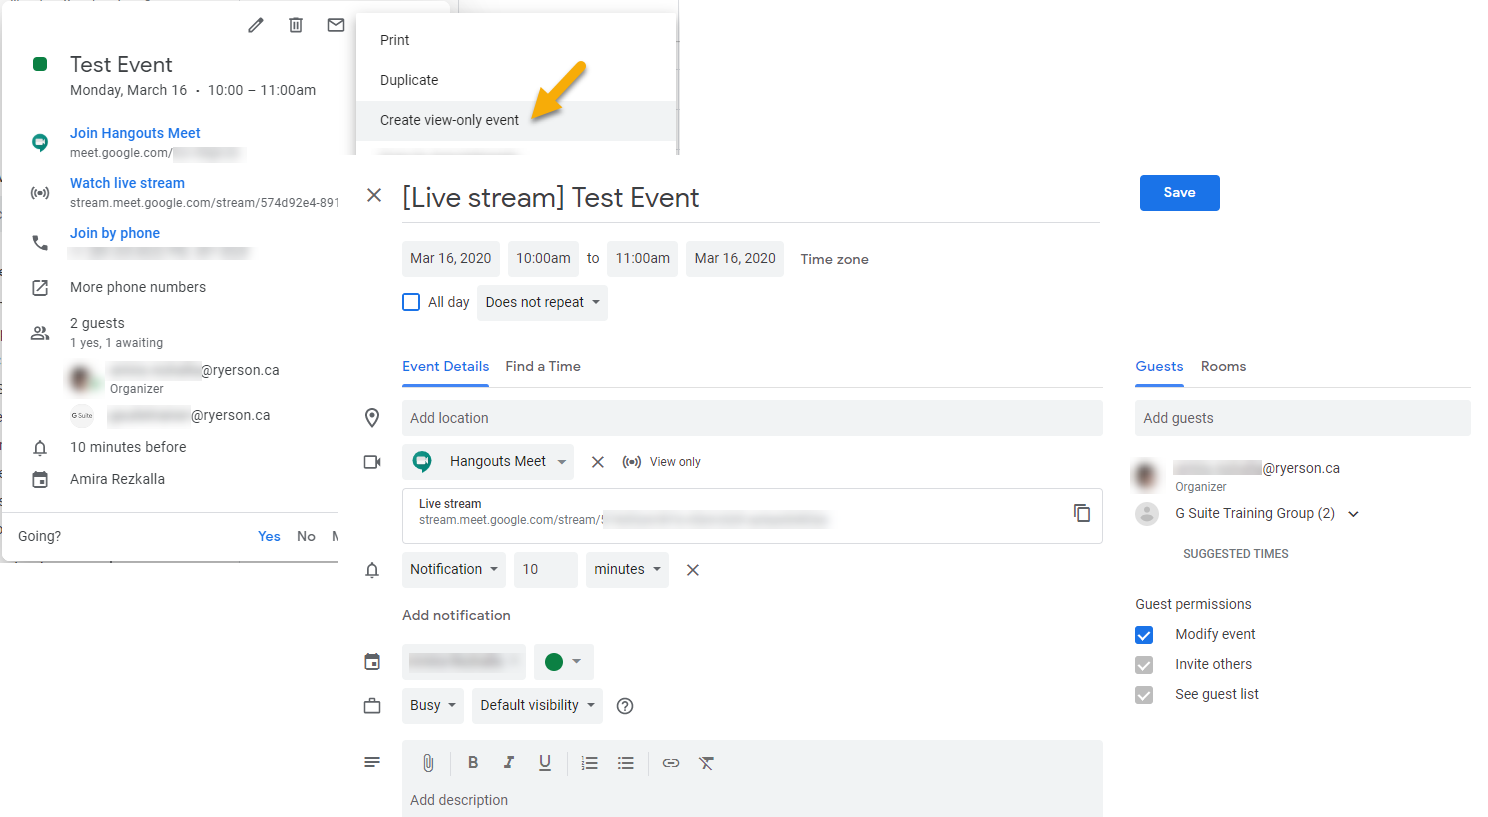 Creating a view-only event in Google Calendar for a live stream event.